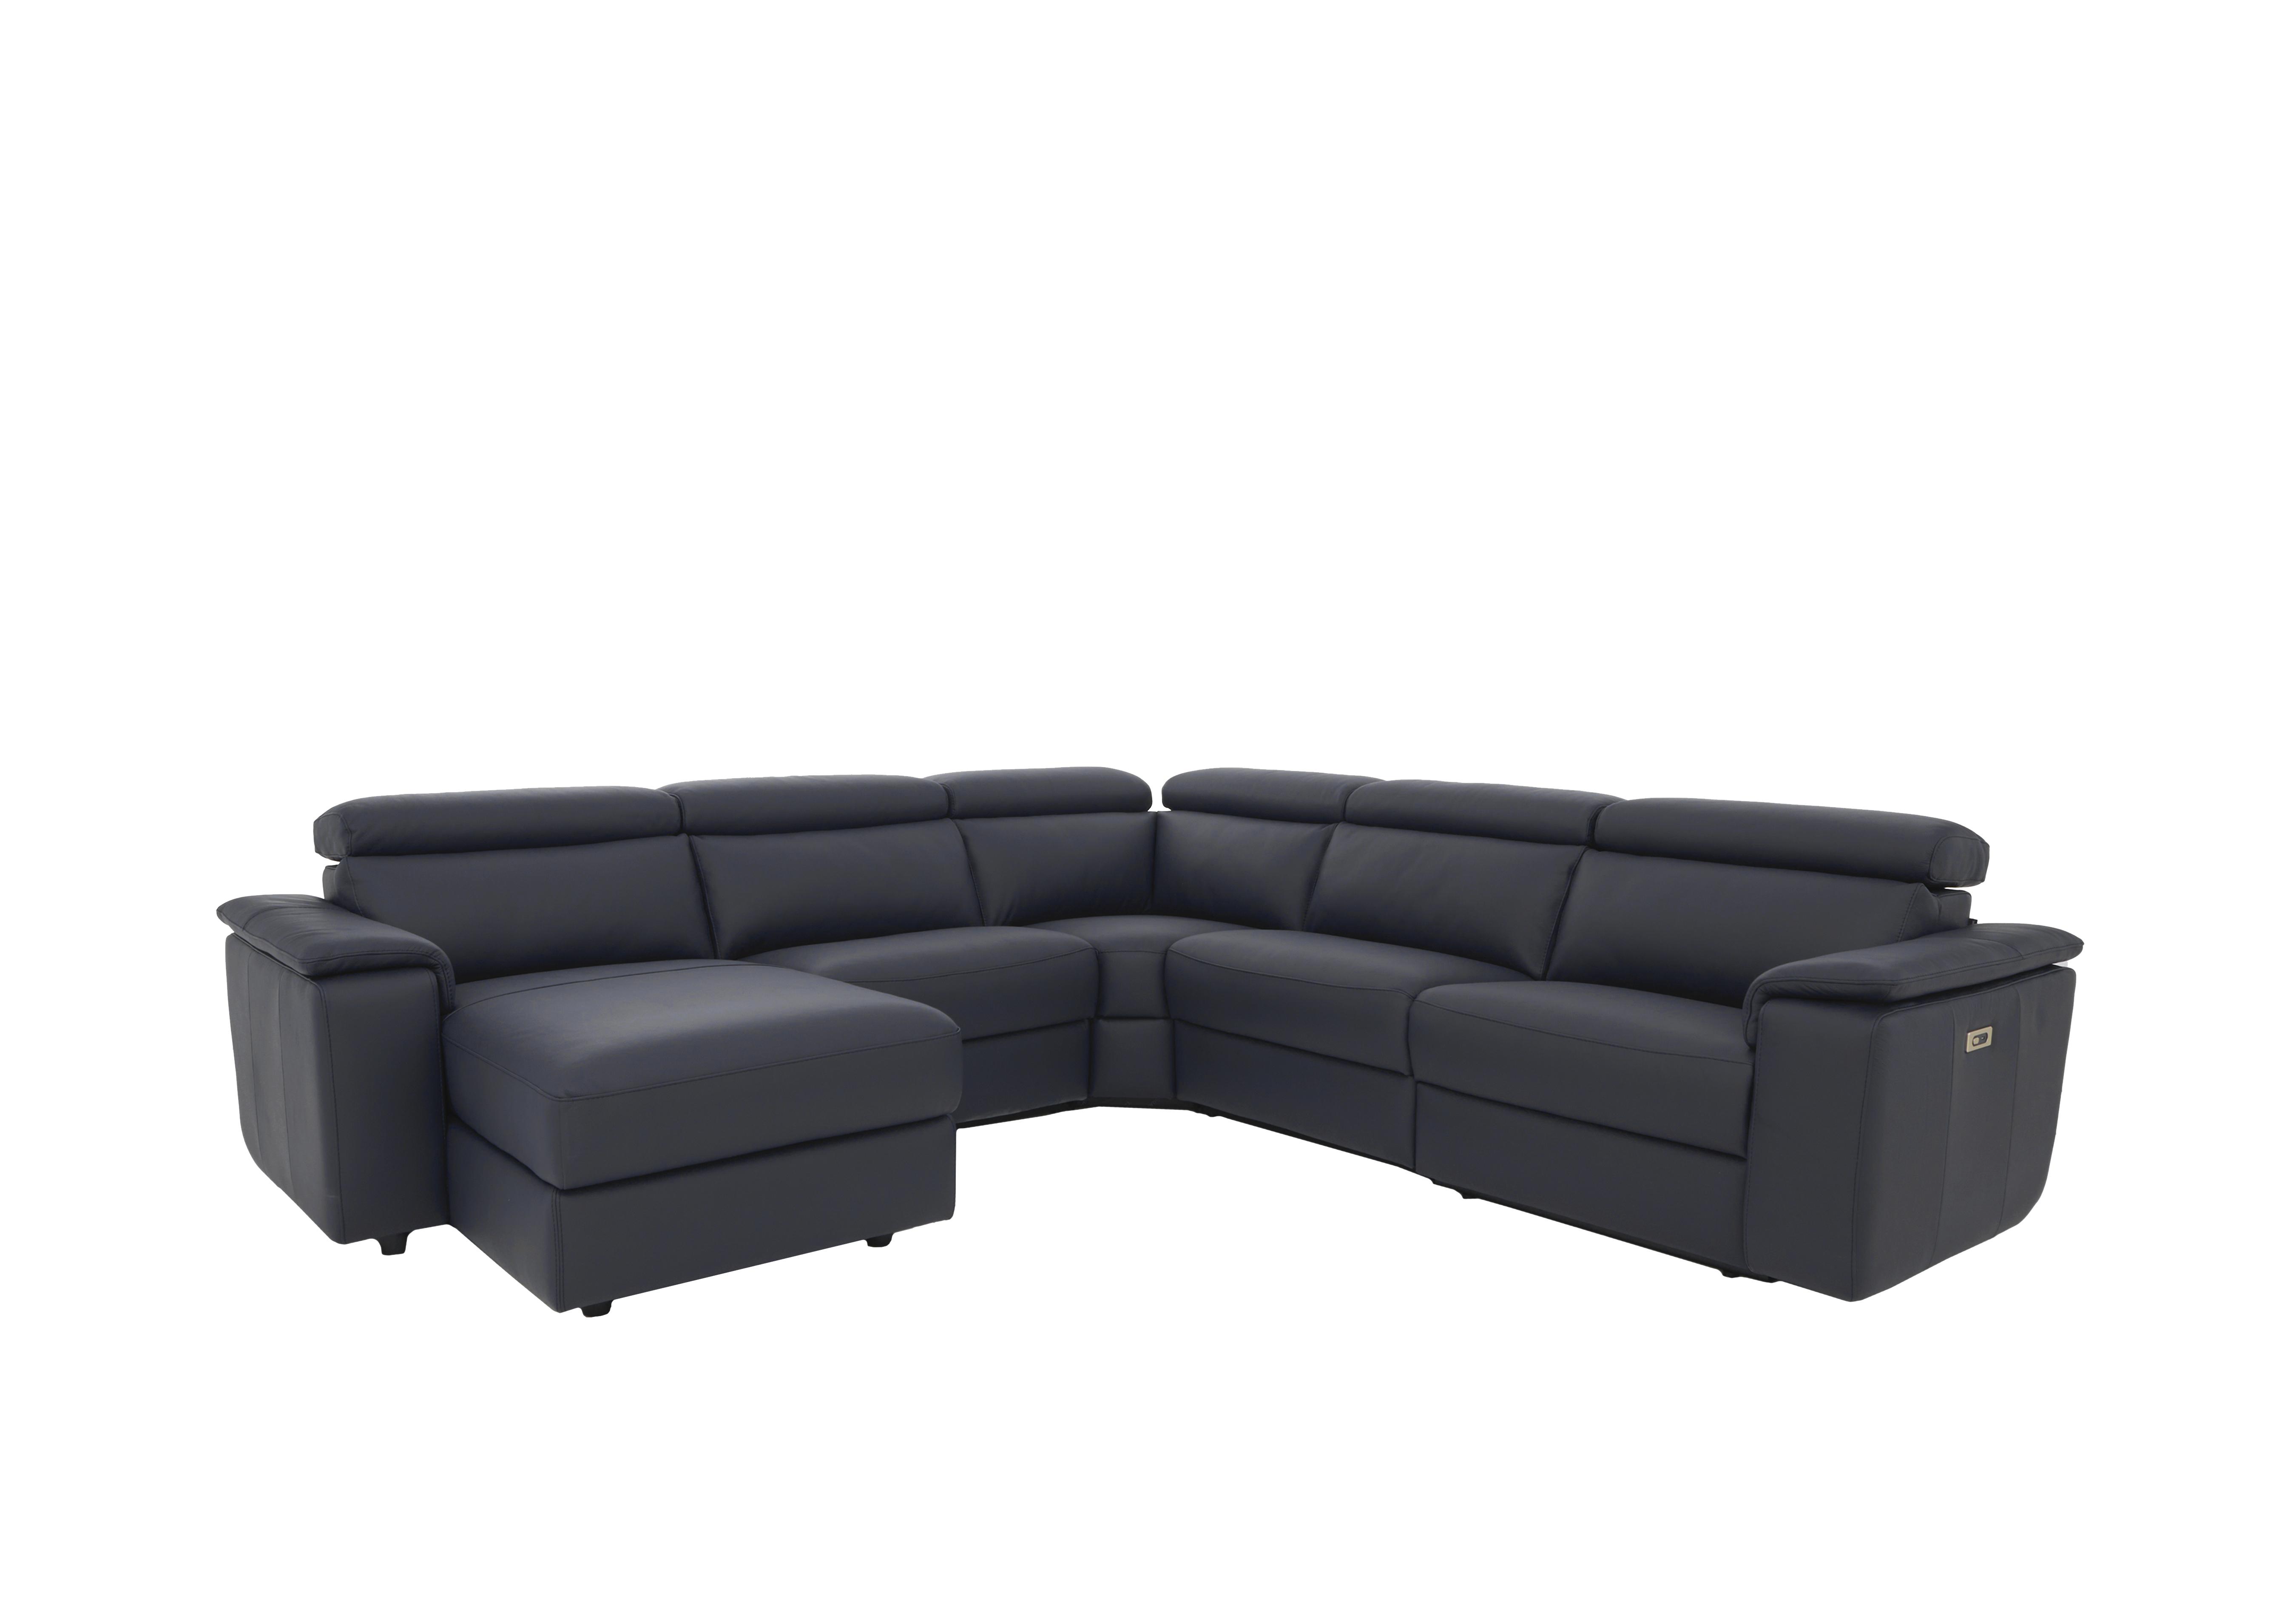 Davide Large Leather Corner Sofa with Chaise End in 81 Torello Blu on Furniture Village